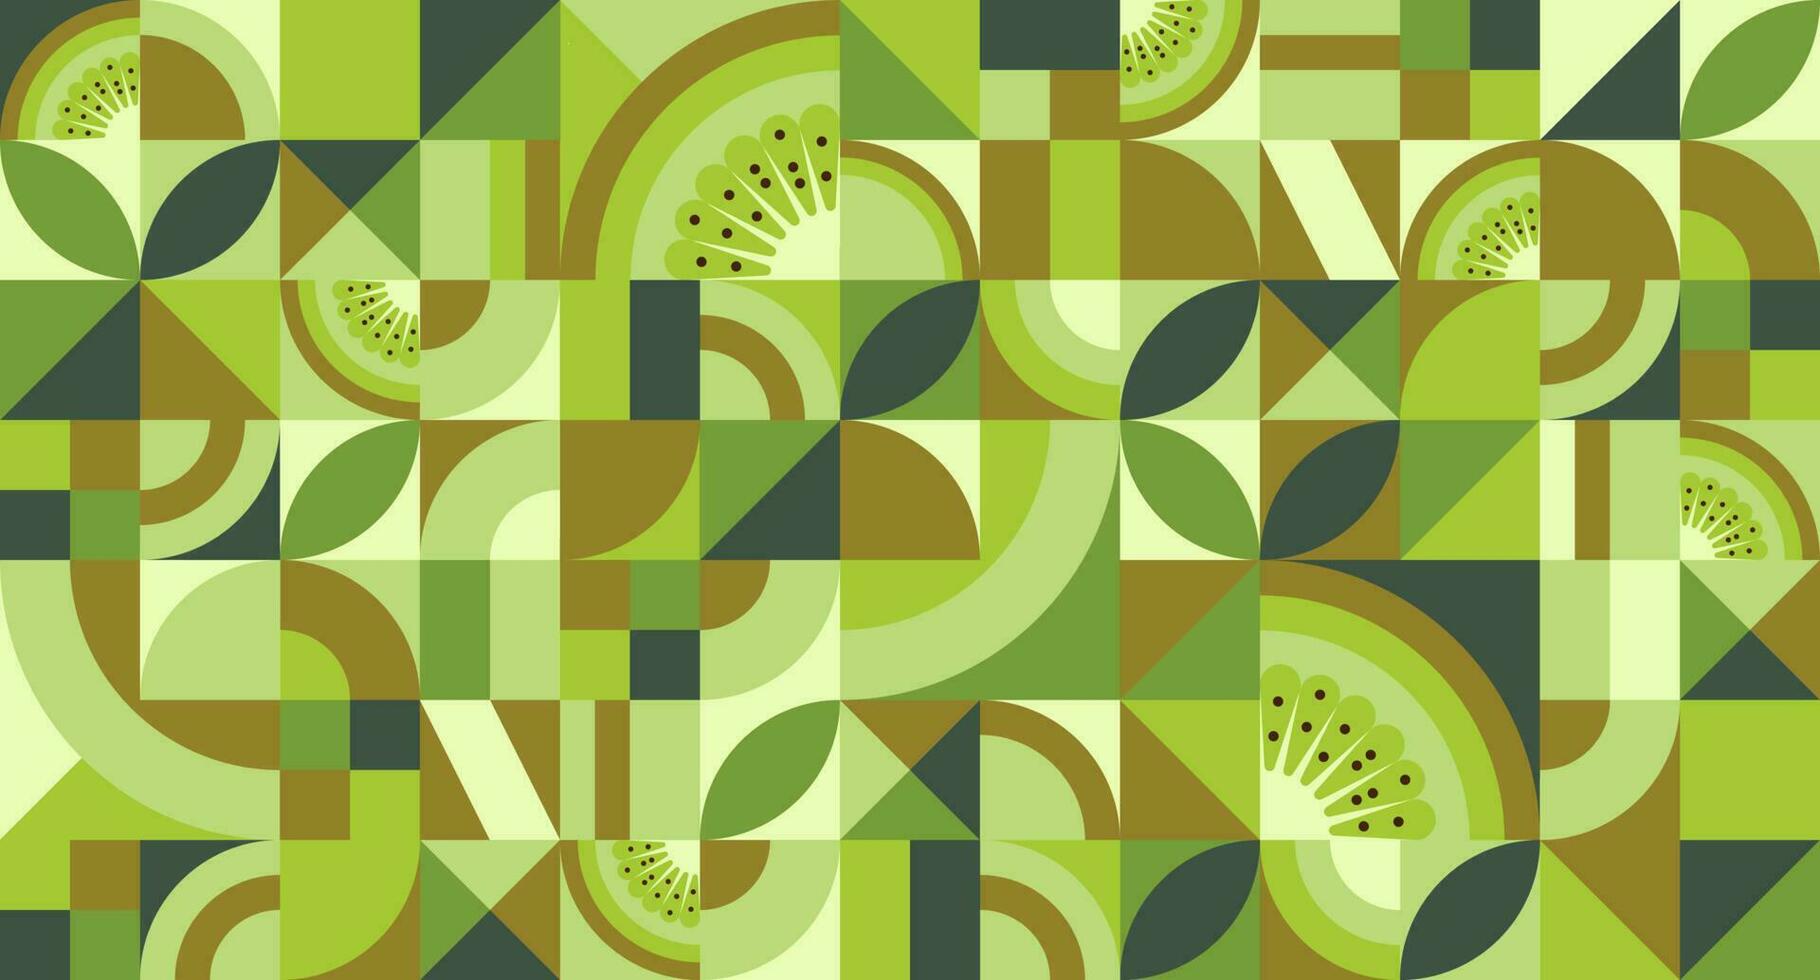 Abstract geometric background with kiwi fruit in Bauhaus style. Texture with simple repeating shapes, mosaic retro wallpaper. Seamless pattern. Vector illustration